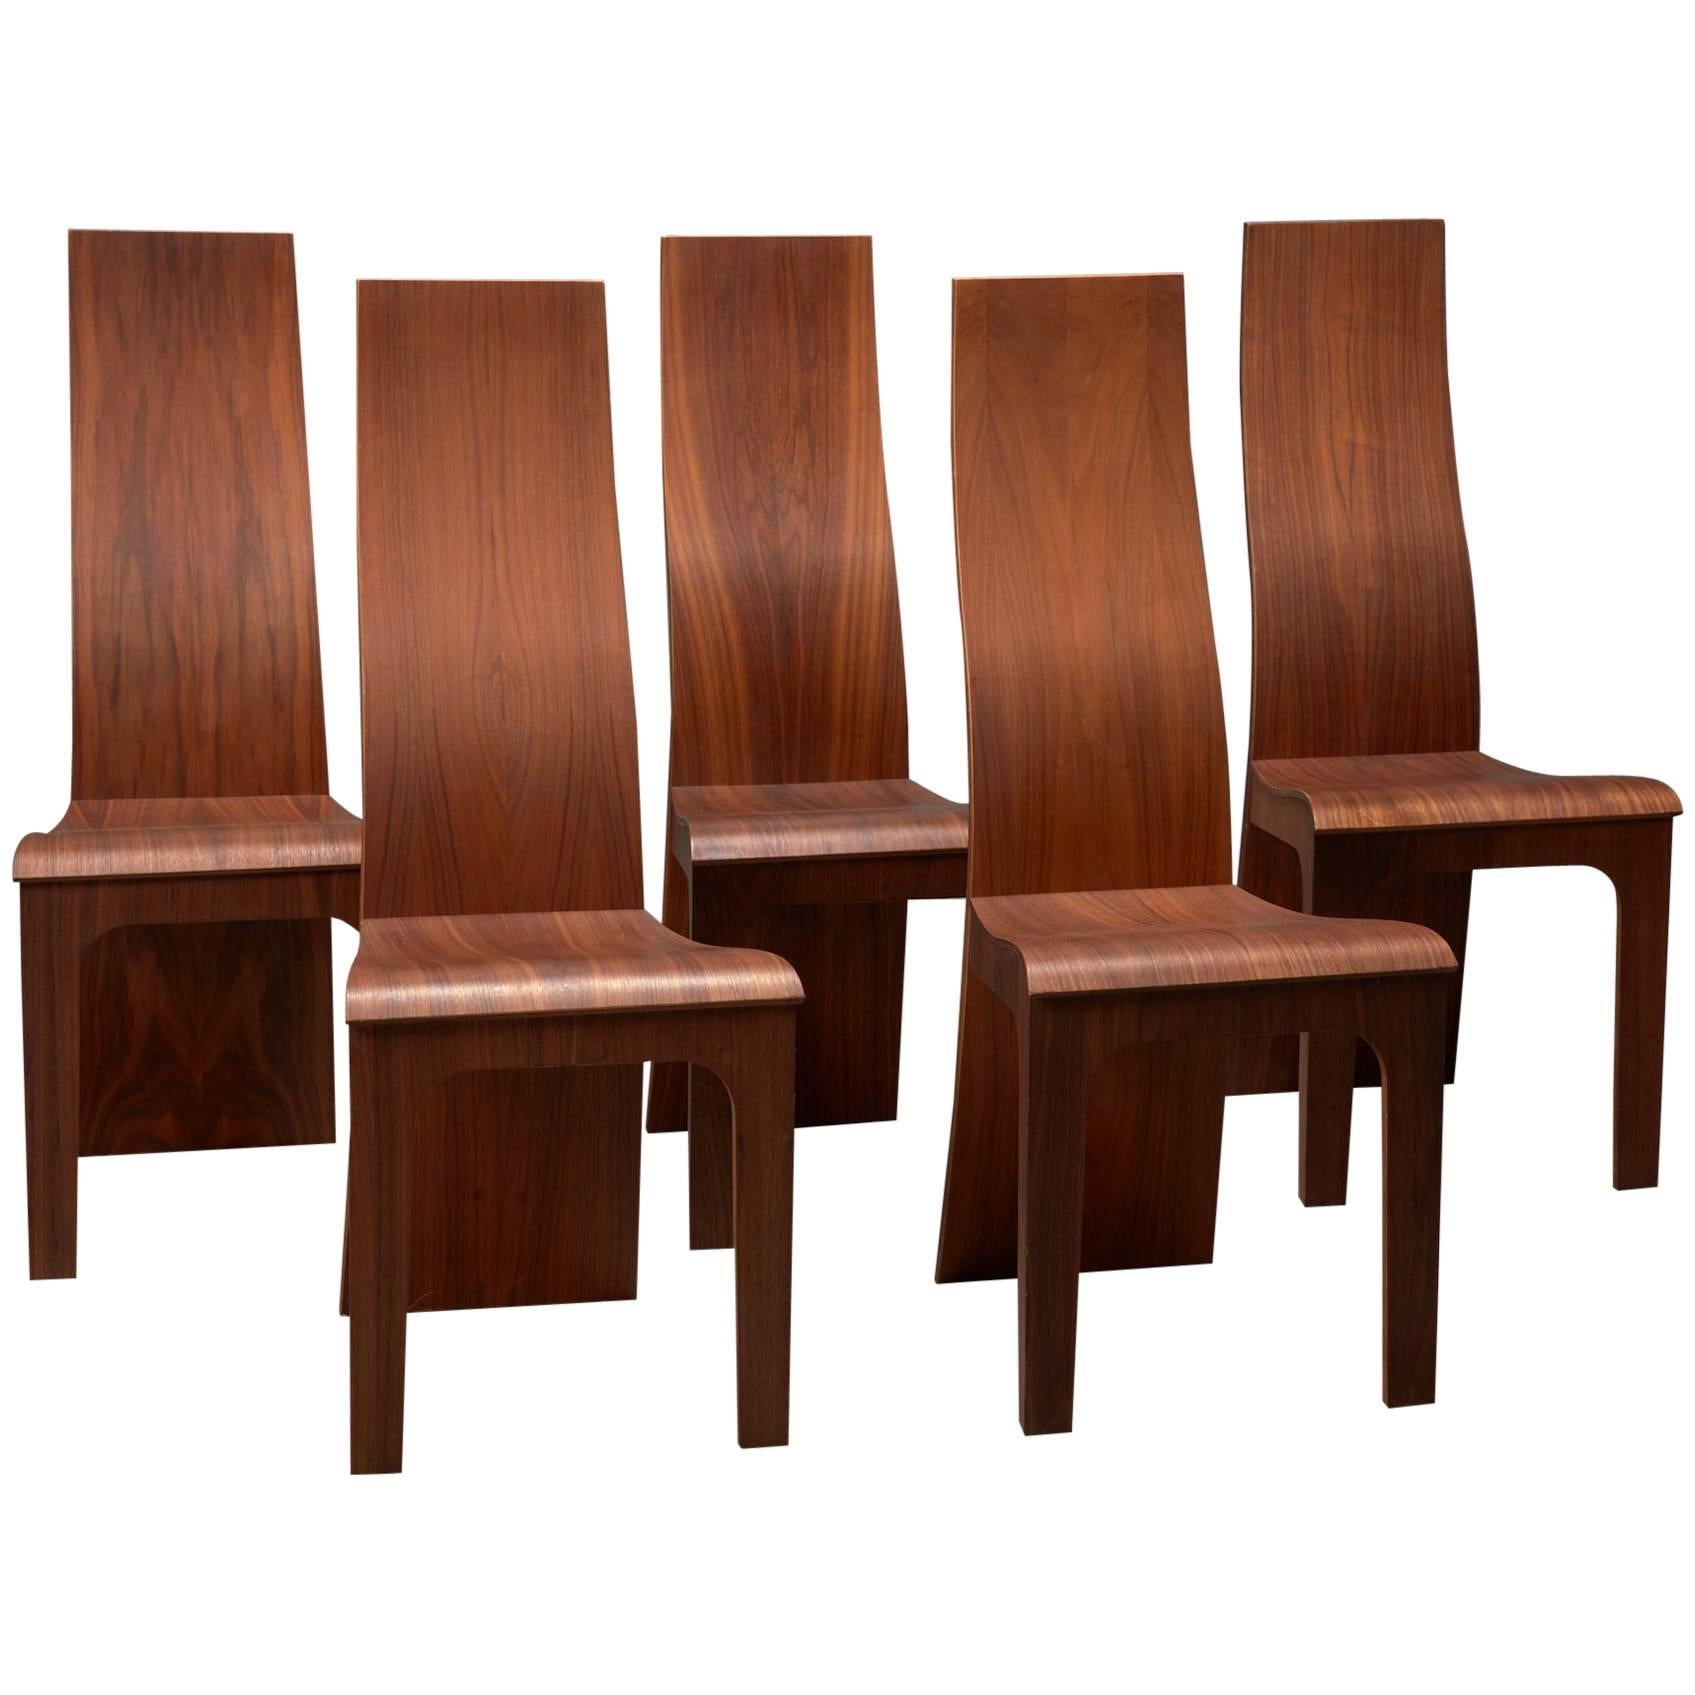 Set of Five High Back Rosewood Bent Plywood Chairs by Hans Karlsson